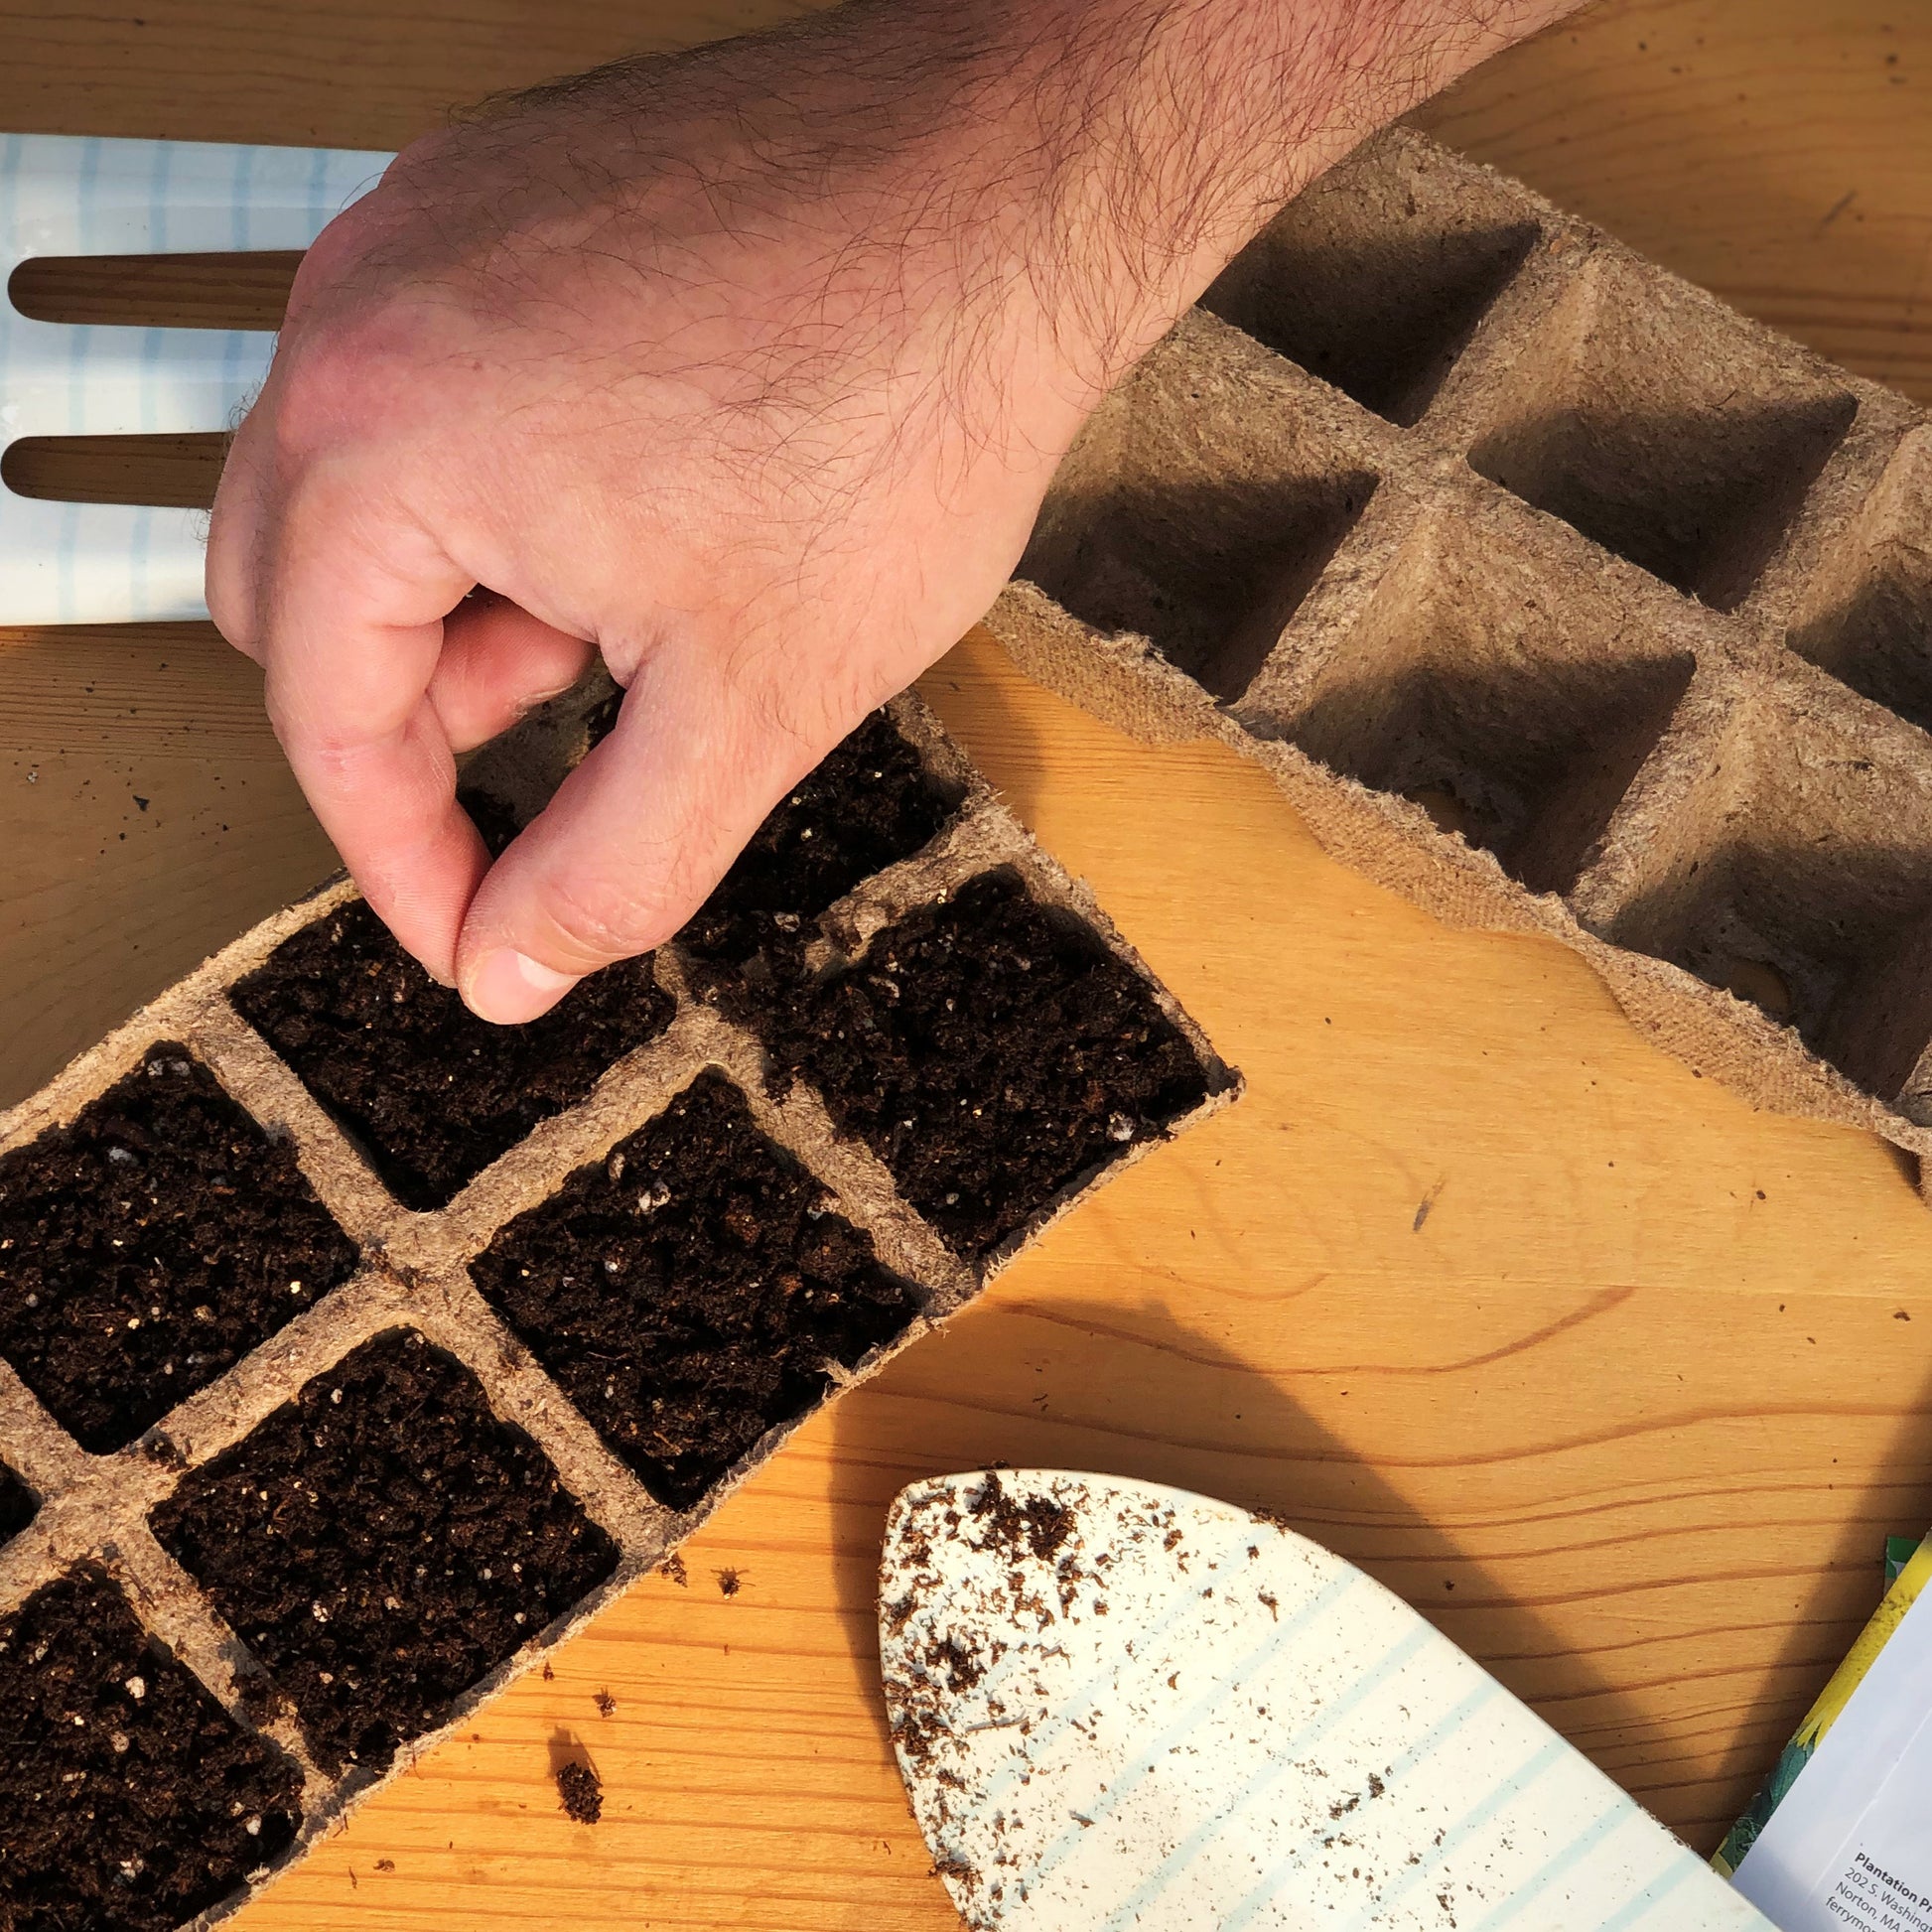 Sowing Dark Green Zucchini Seeds into seed starting peat strip trays filled with seed starting mix.